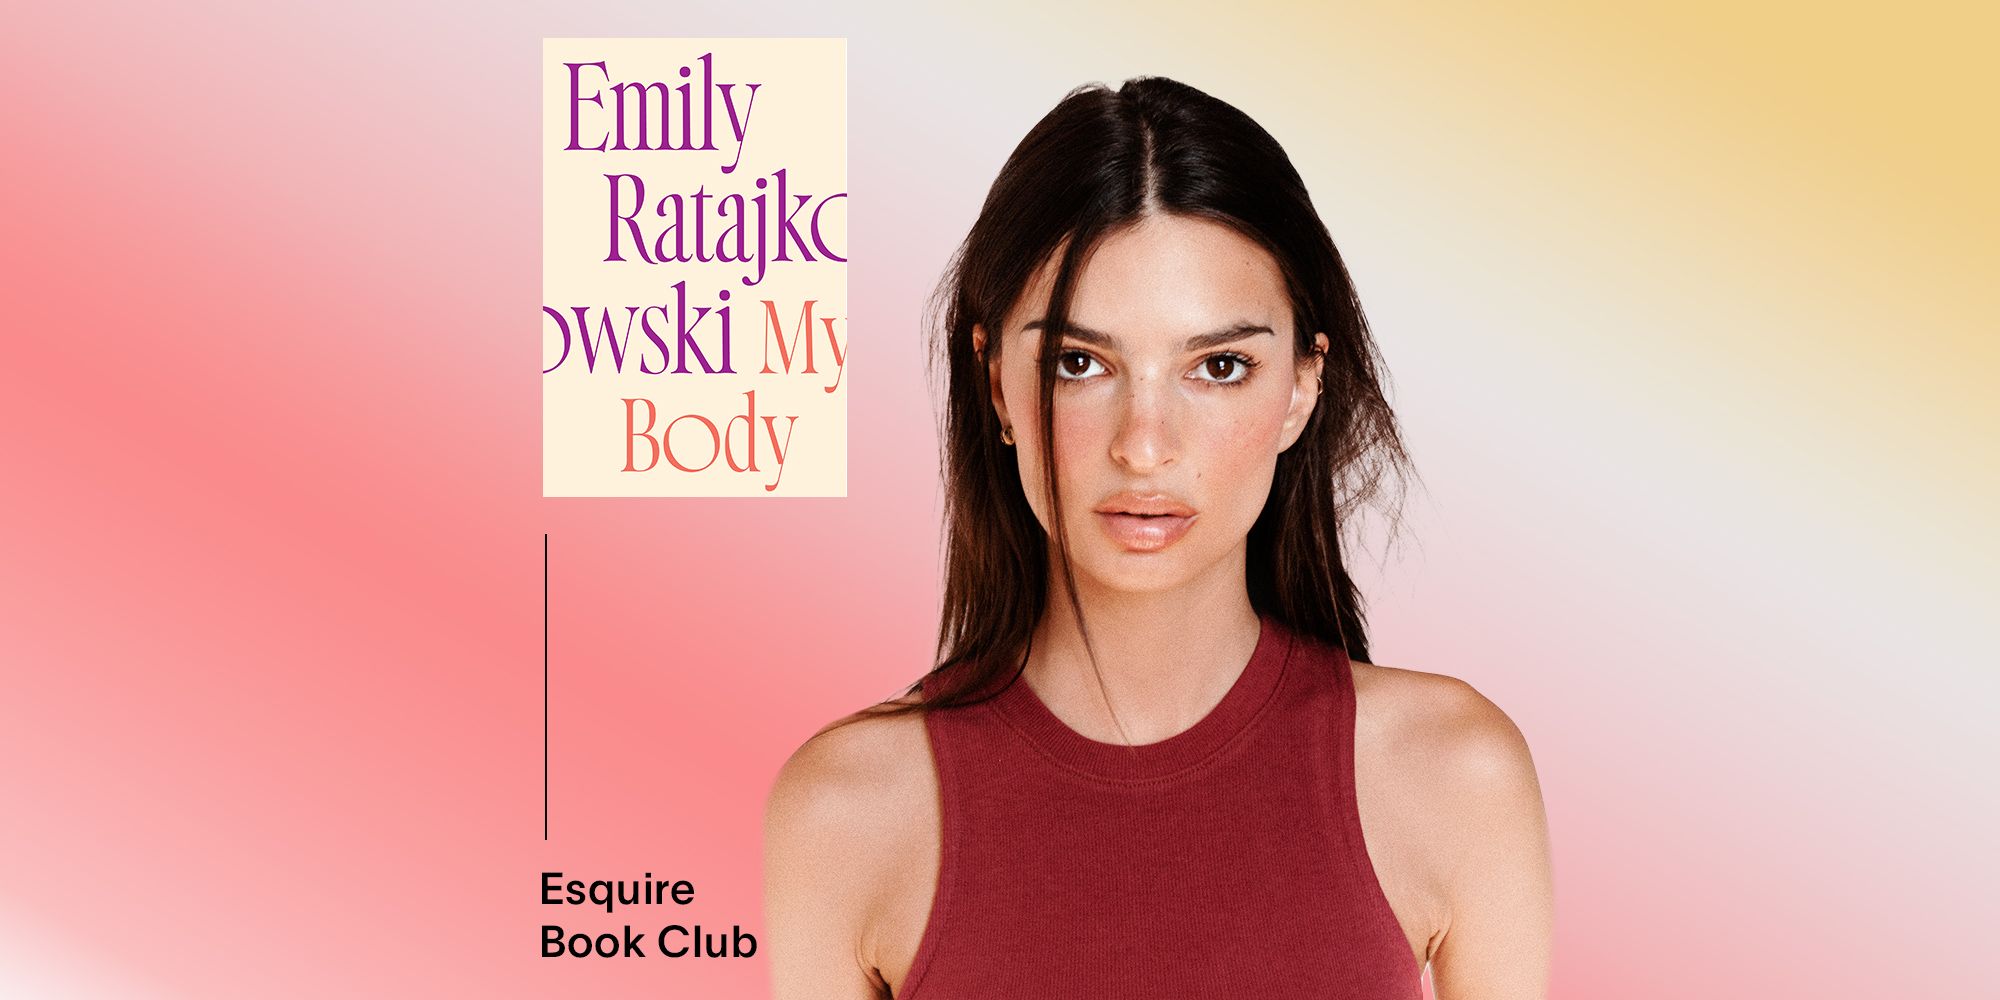 Hot Girl Fucked Without His Permission - Emily Ratajkowski Interview on New Book 'My Body'